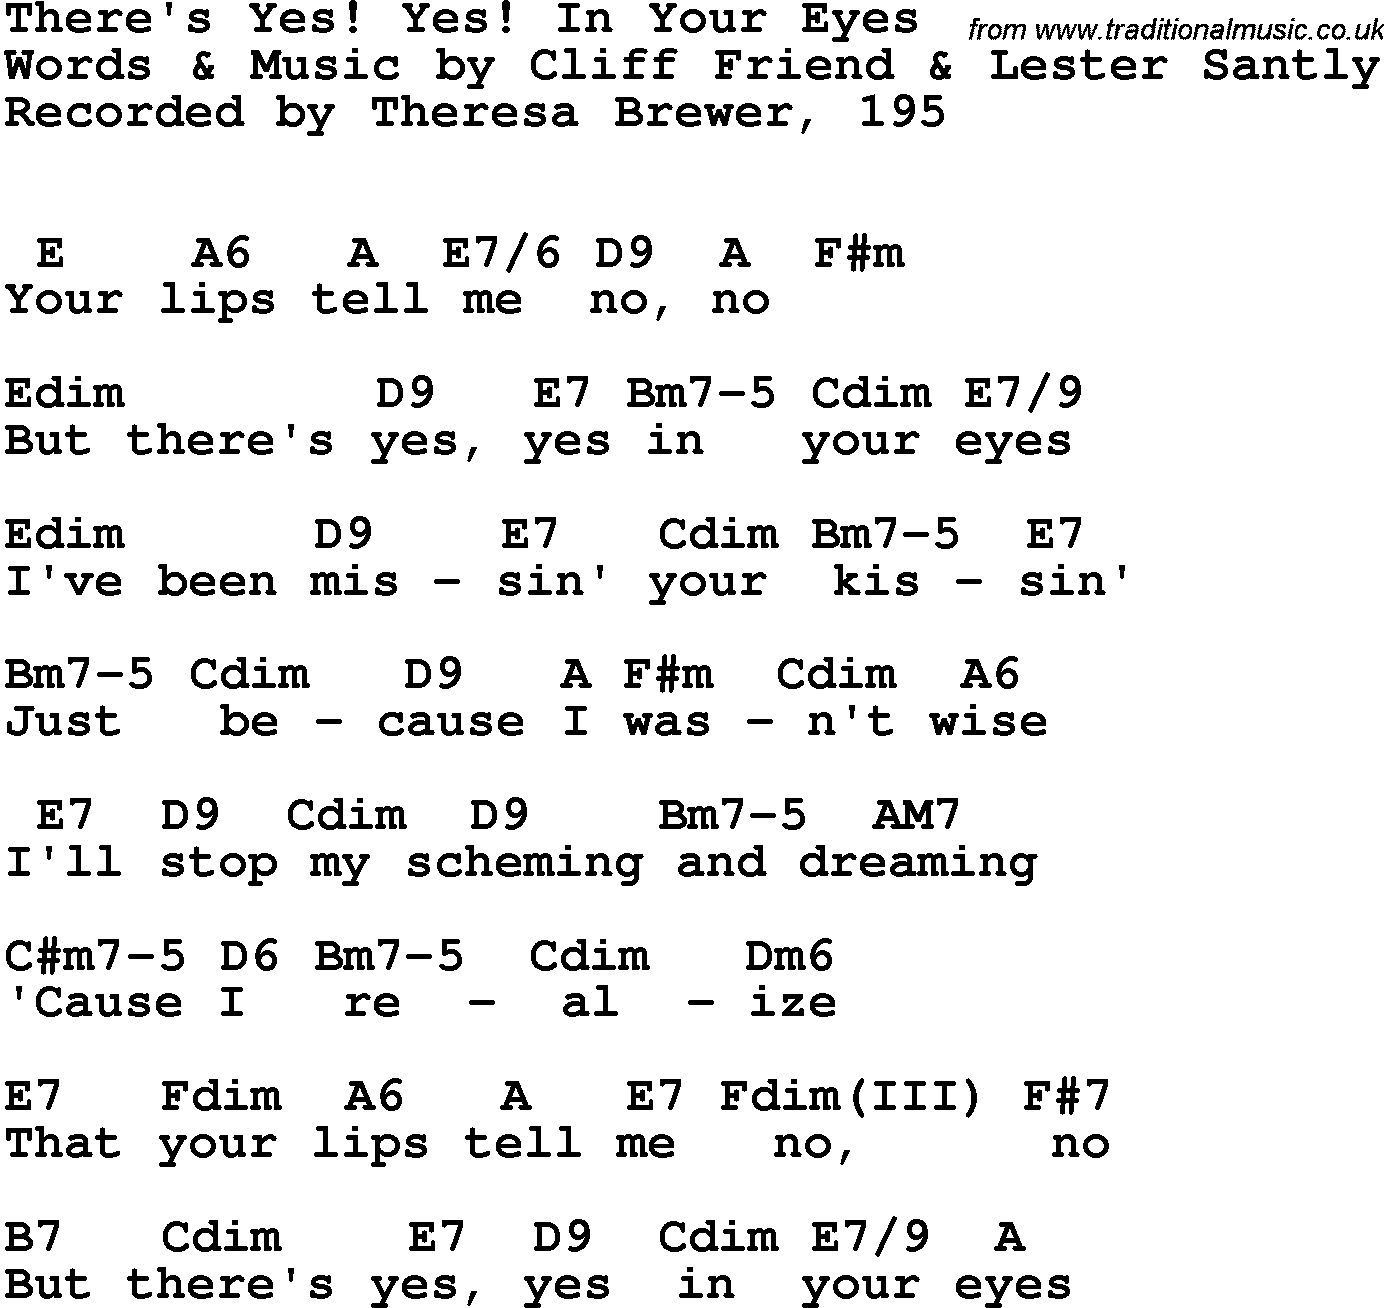 Song Lyrics with guitar chords for There's Yes! Yes! In Your Eyes - Teresa Brewer, 1951